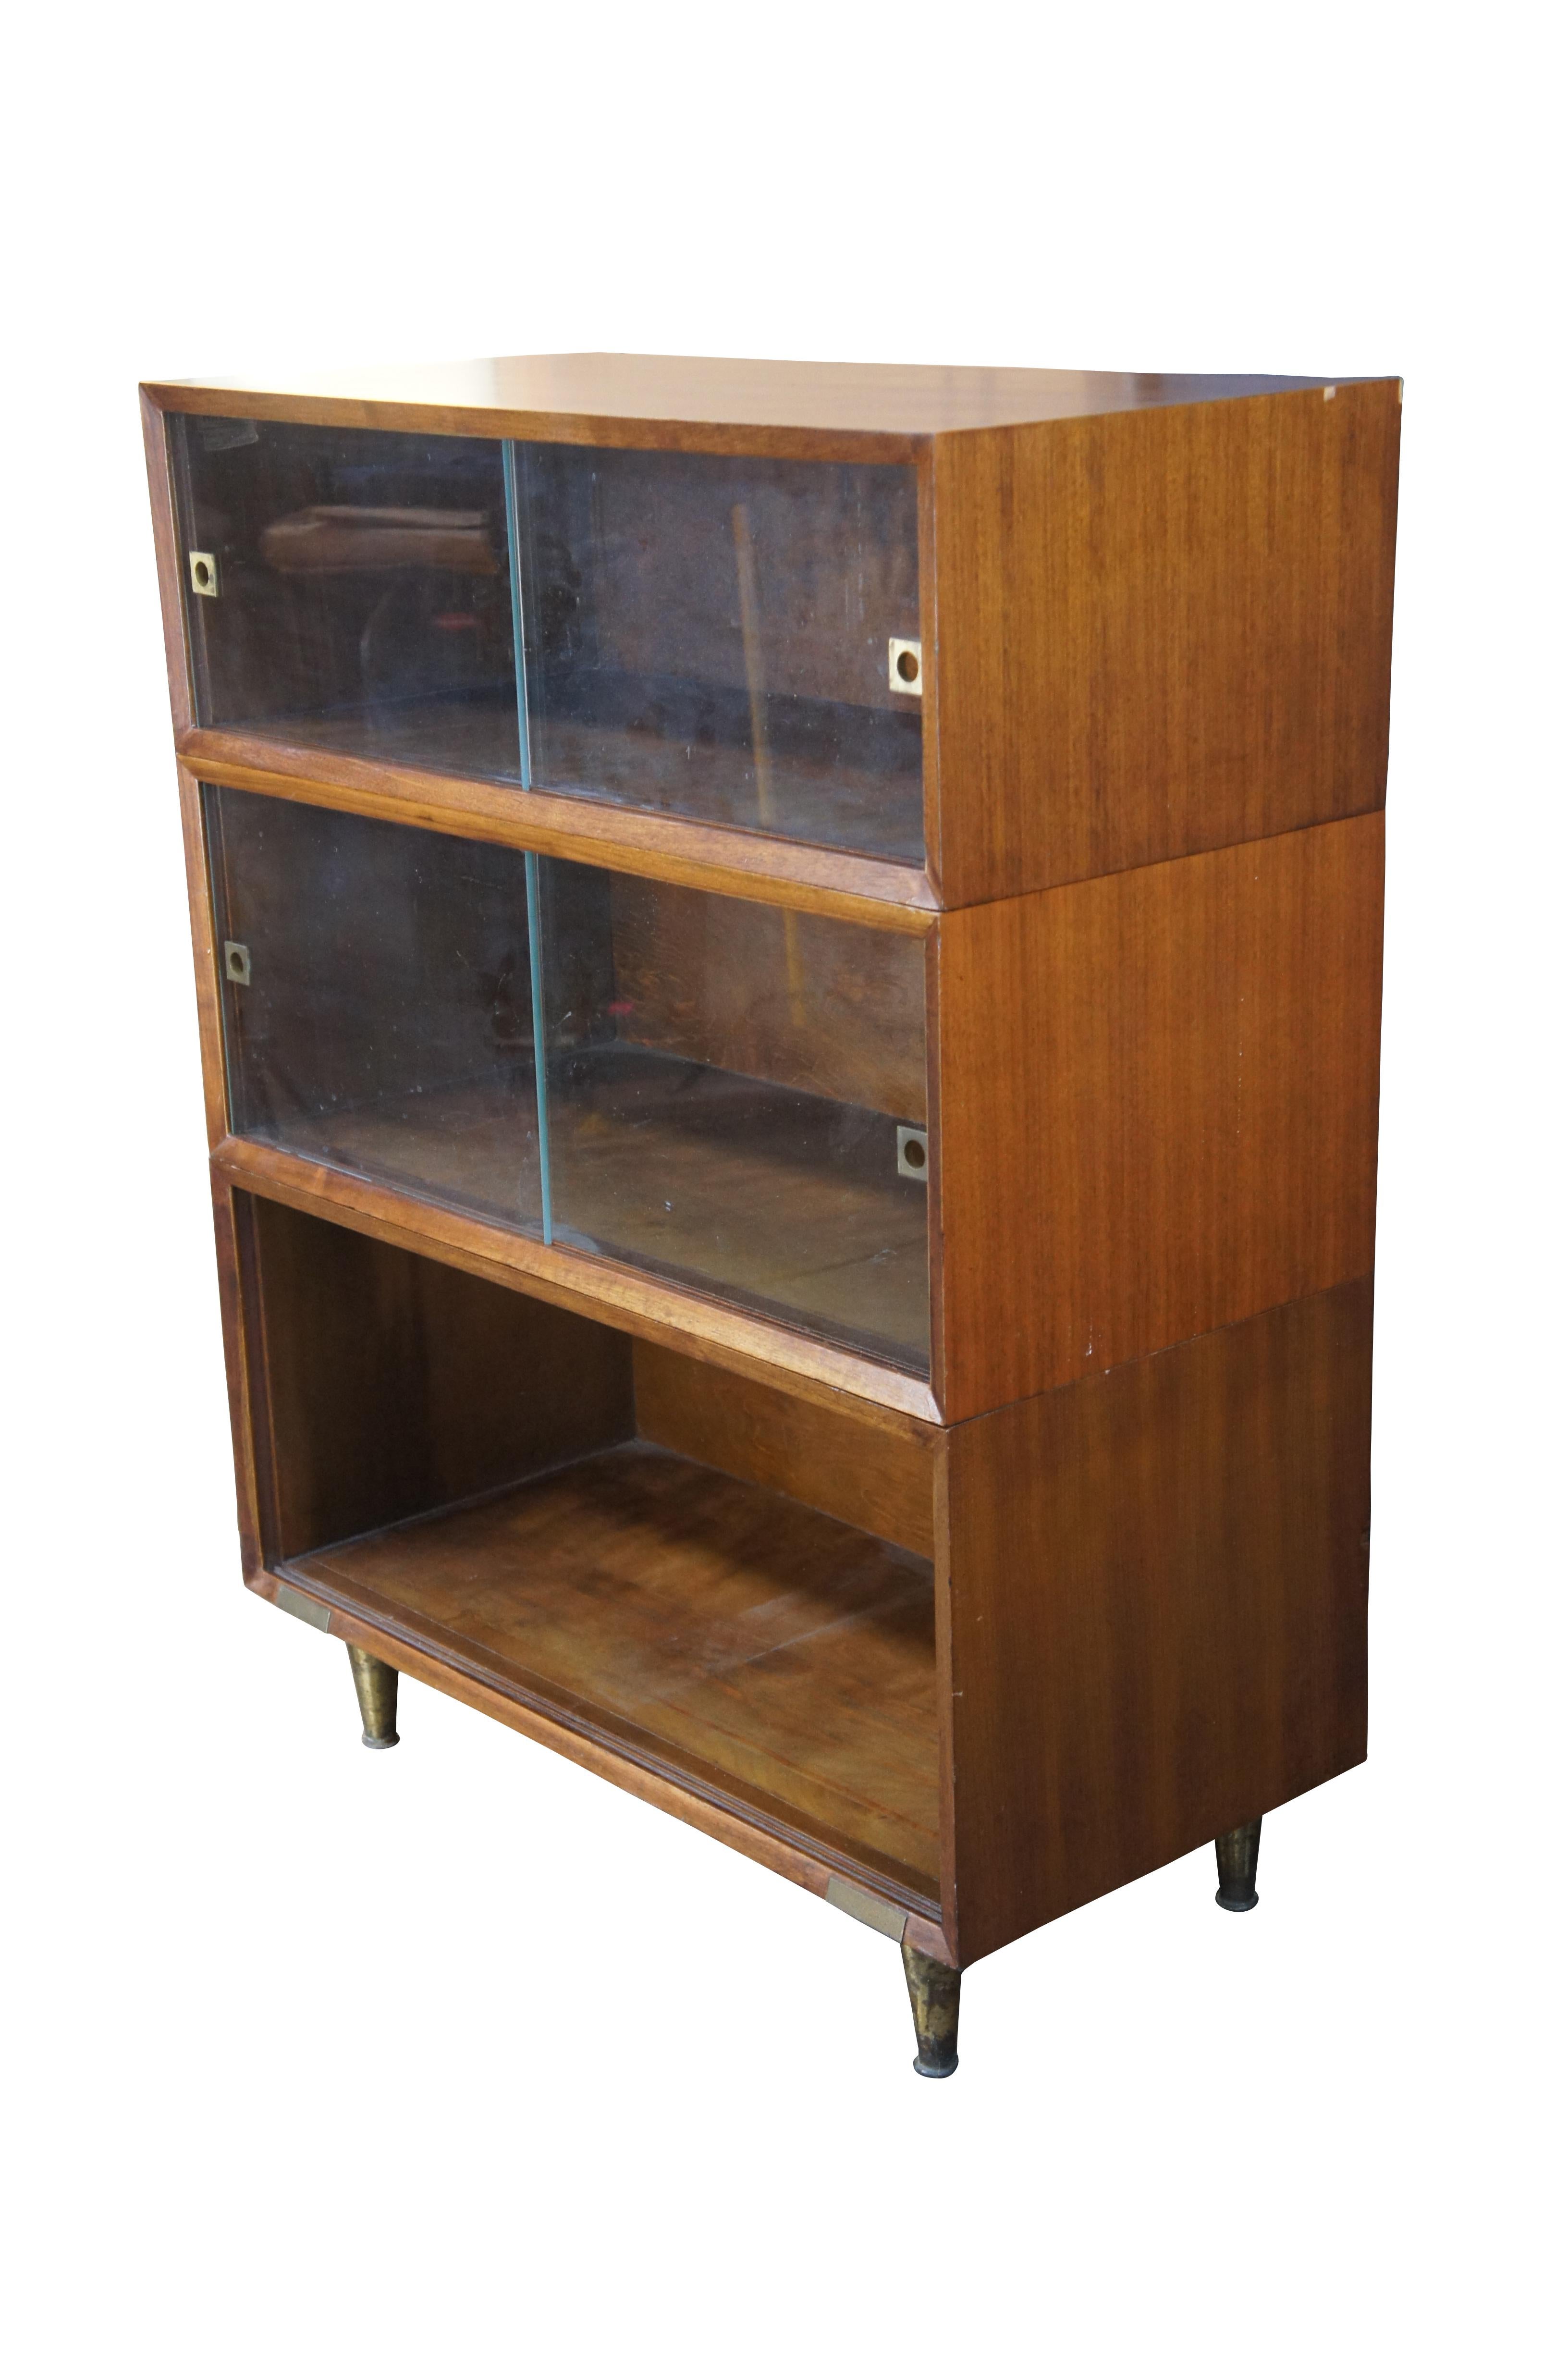 Hale Manufacturing Company Barrister Style Bookcase / Display Cabinet, circa 1970s. Made from gunstock walnut with brass tapered legs. The top two shelves have sliding glass with brass handles. The bottom section is missing glass. an intriguing